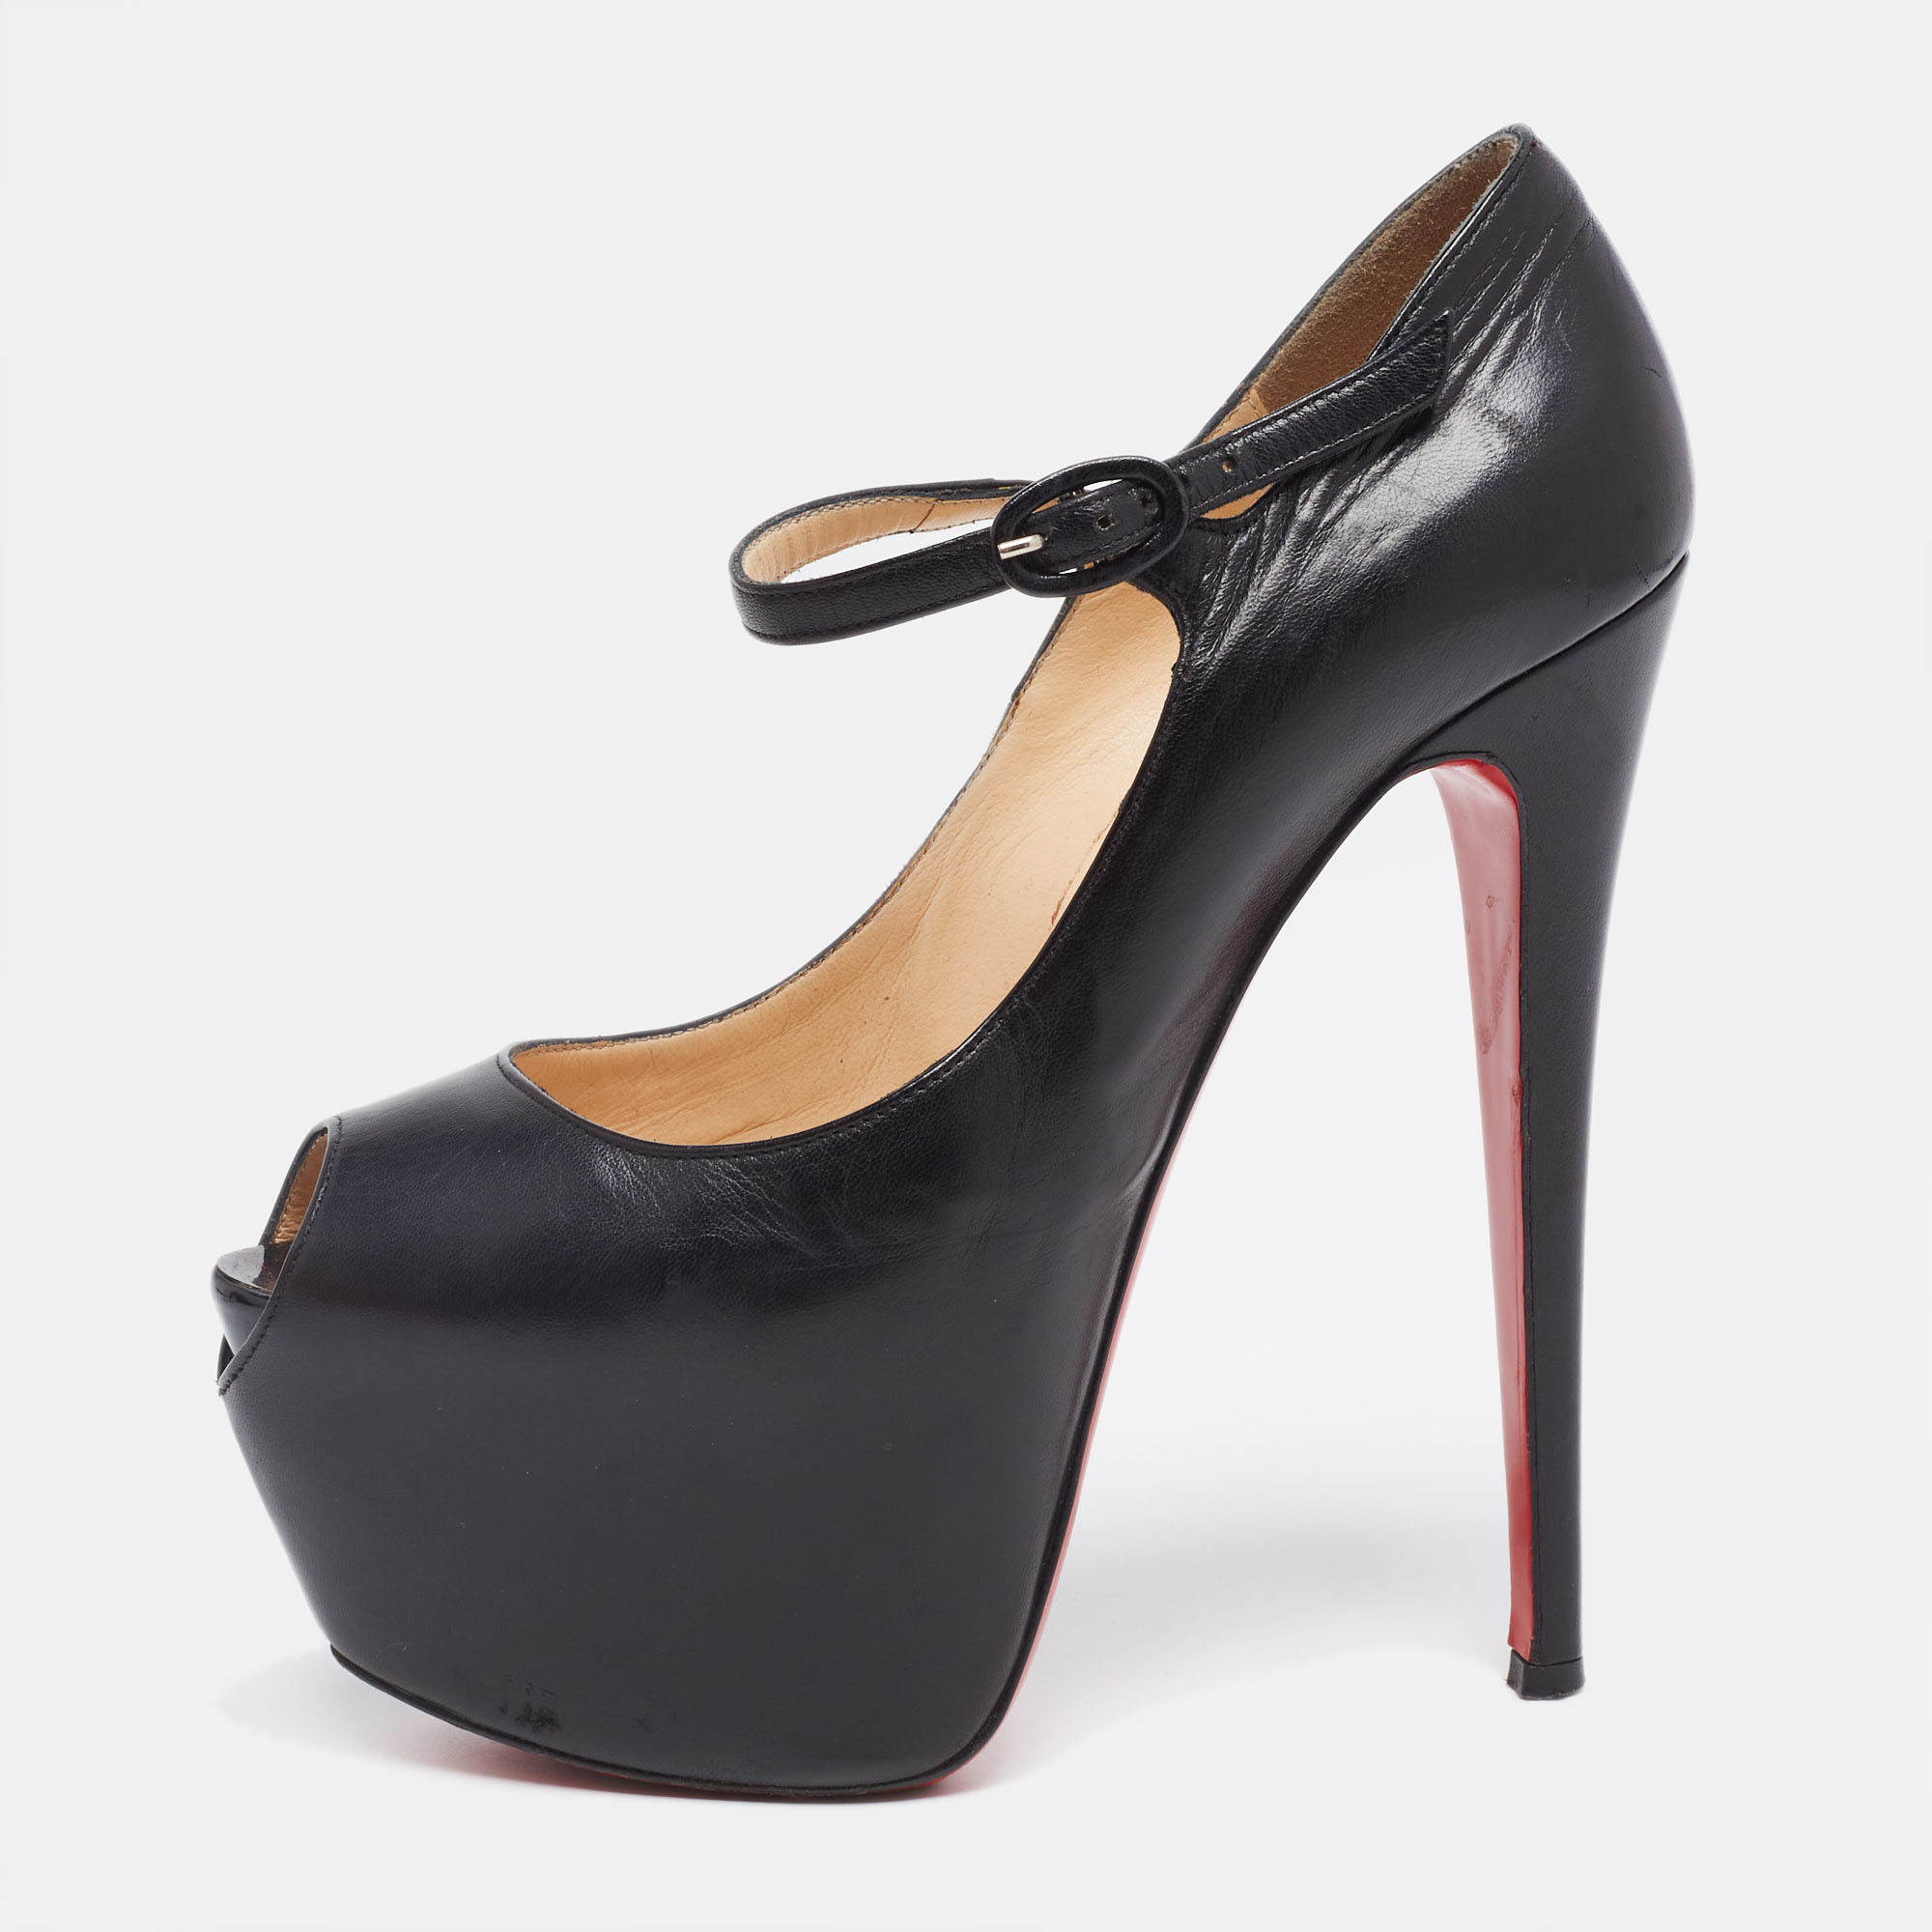 Pre-owned Christian Louboutin Black Leather Lady Daf Peep-toe Pumps Size 38.5